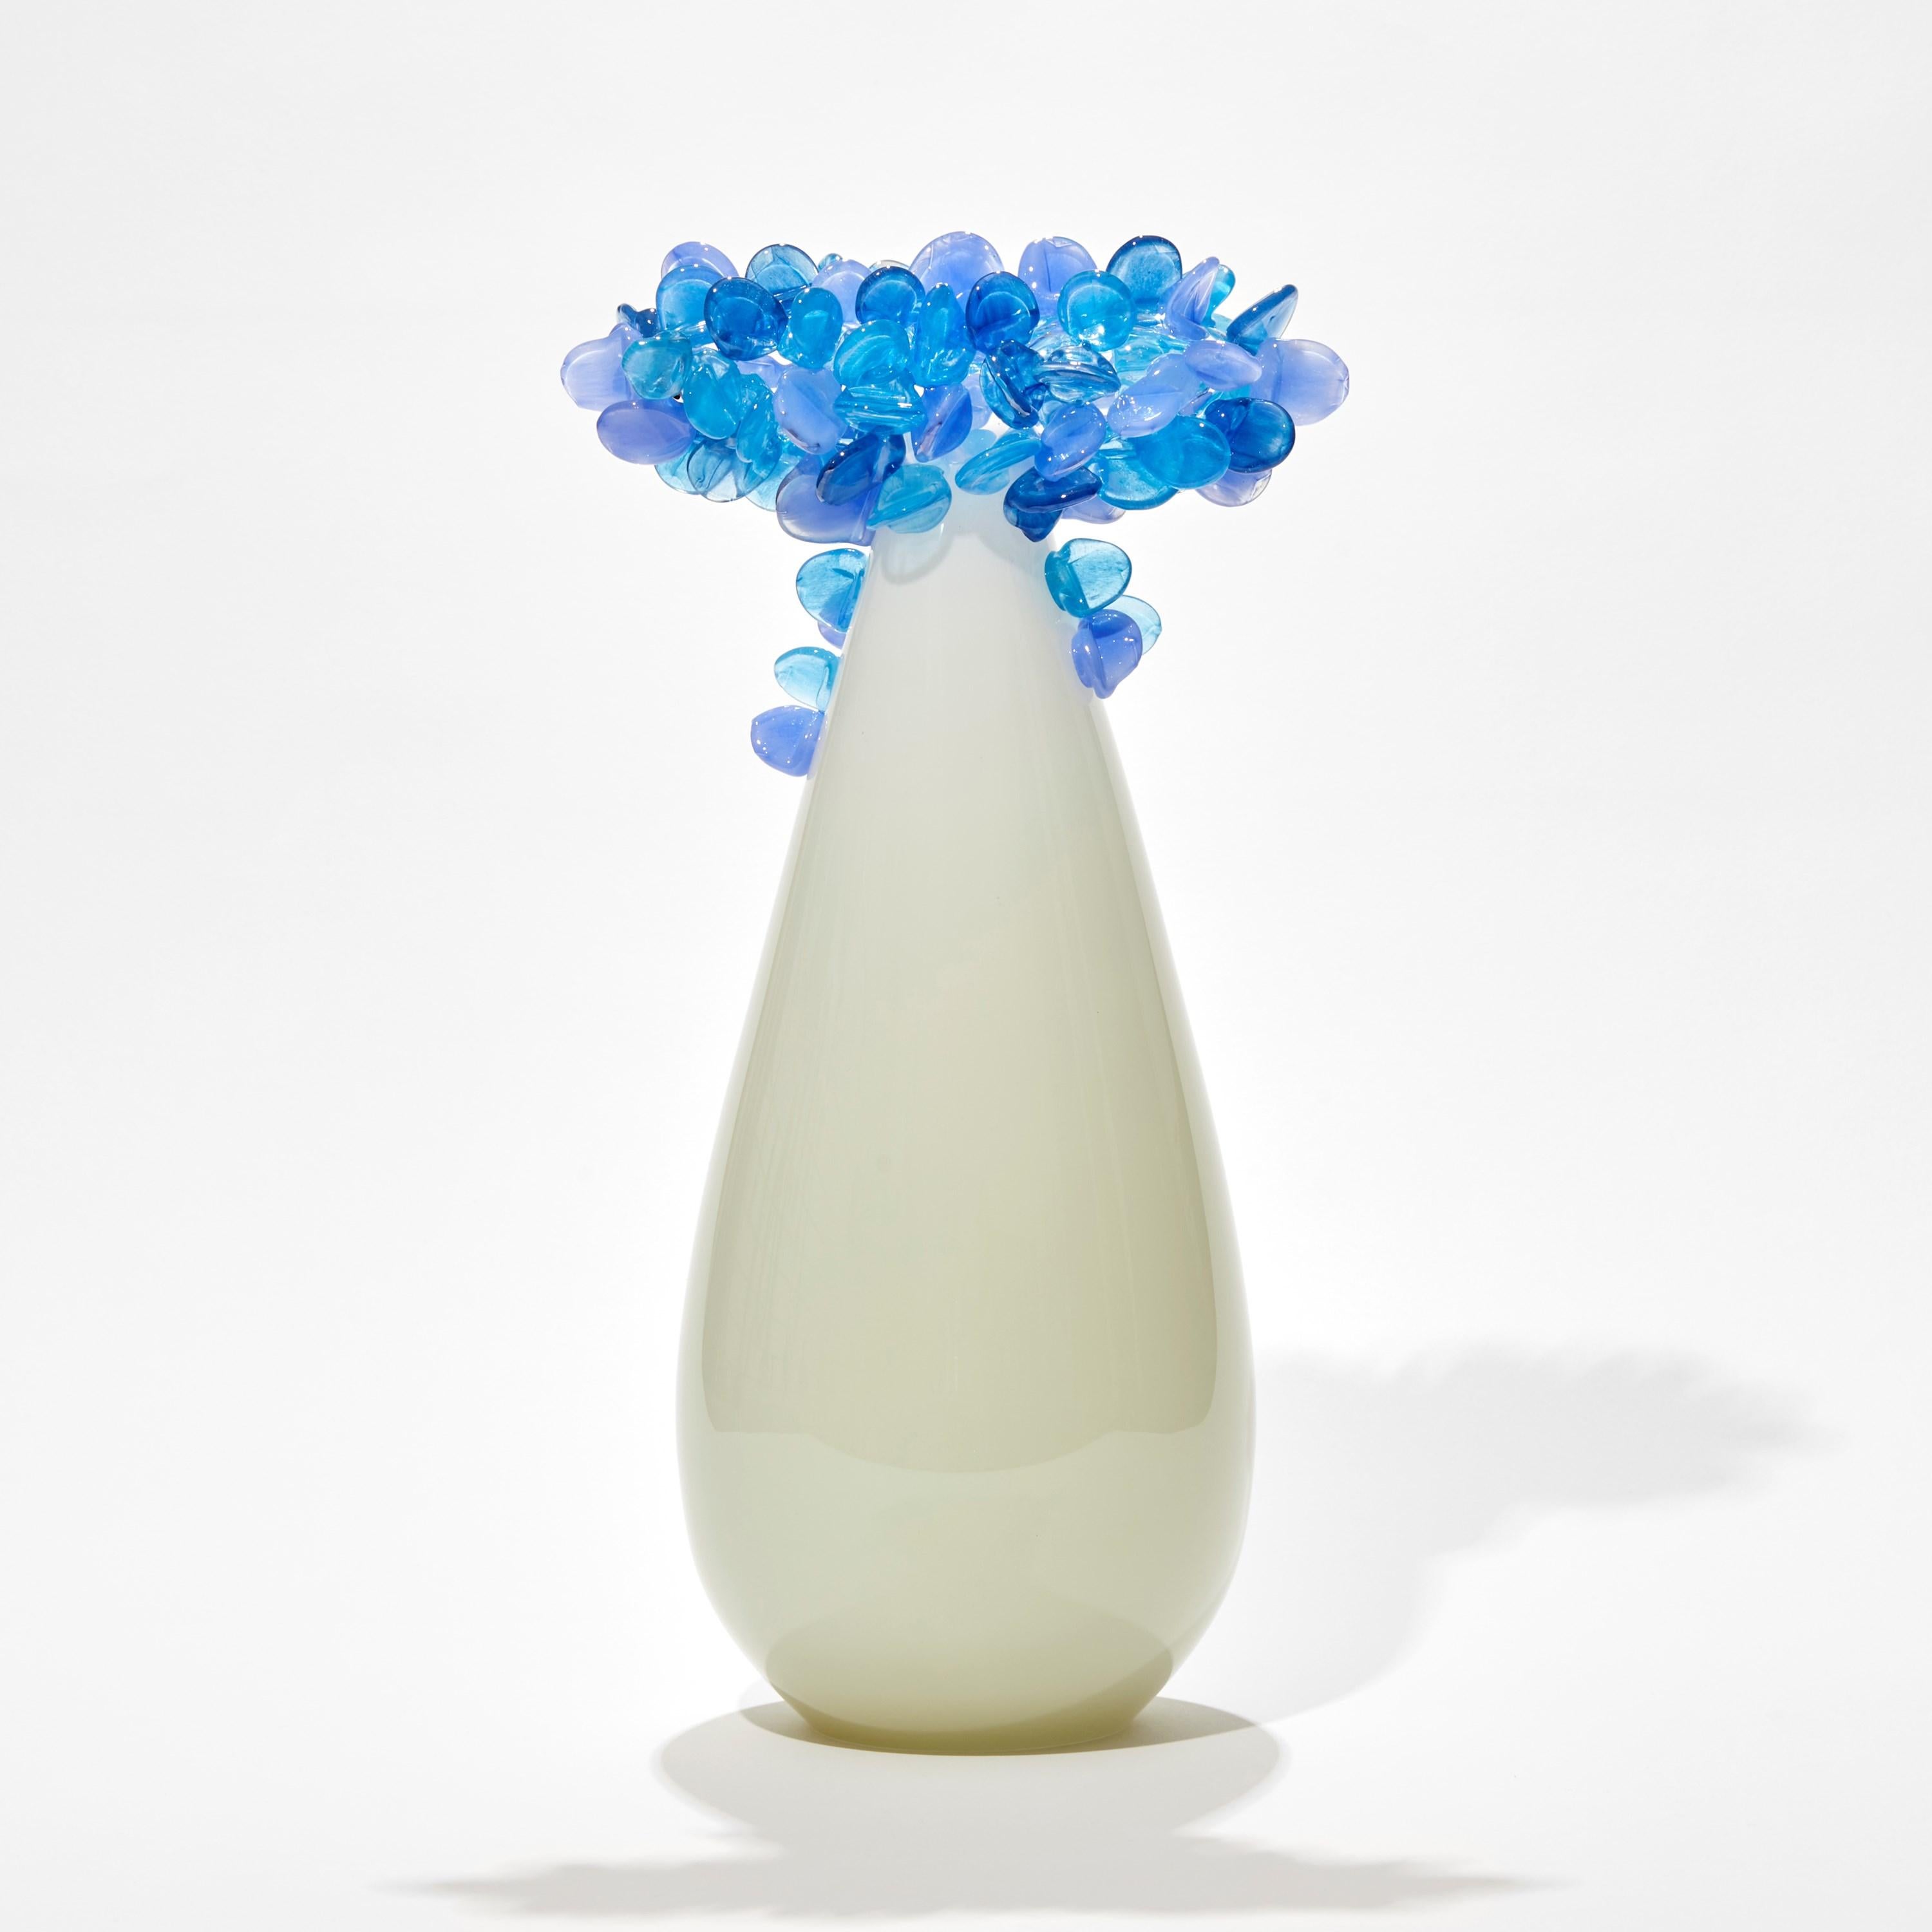 'Enchanted Dawn in Blues II' is a unique glass tree sculpture by the British artist, Louis Thompson.

With both his Enchanted Dawn and Dusk collections, Thompson brings a joyous and playful element to his glass. Gracious sweeping trunks are topped